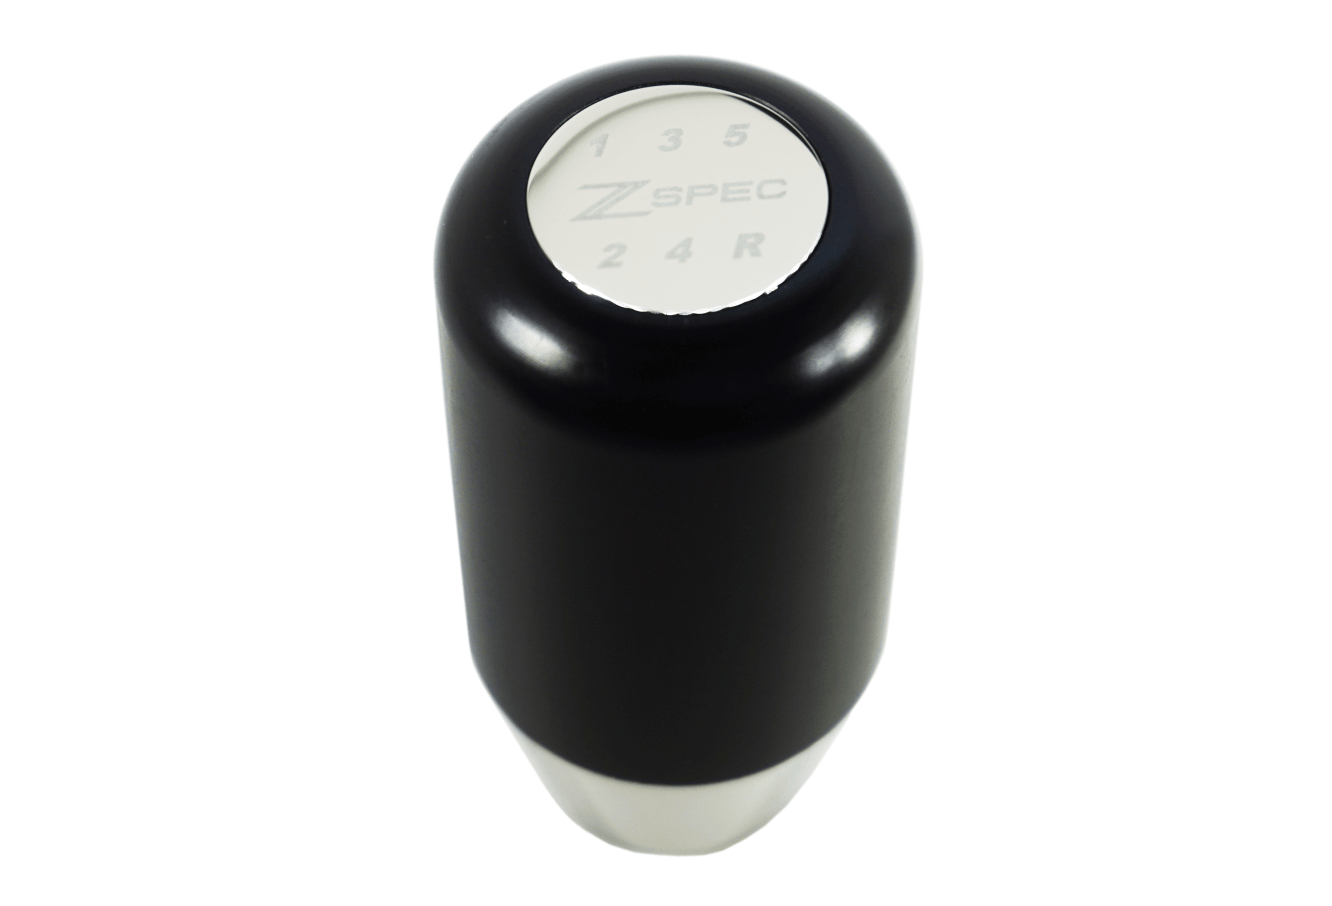 ZSPEC Shift Knob, M12-1.25, Delrin & Stainless, 5-Speed Shift Pattern Coin